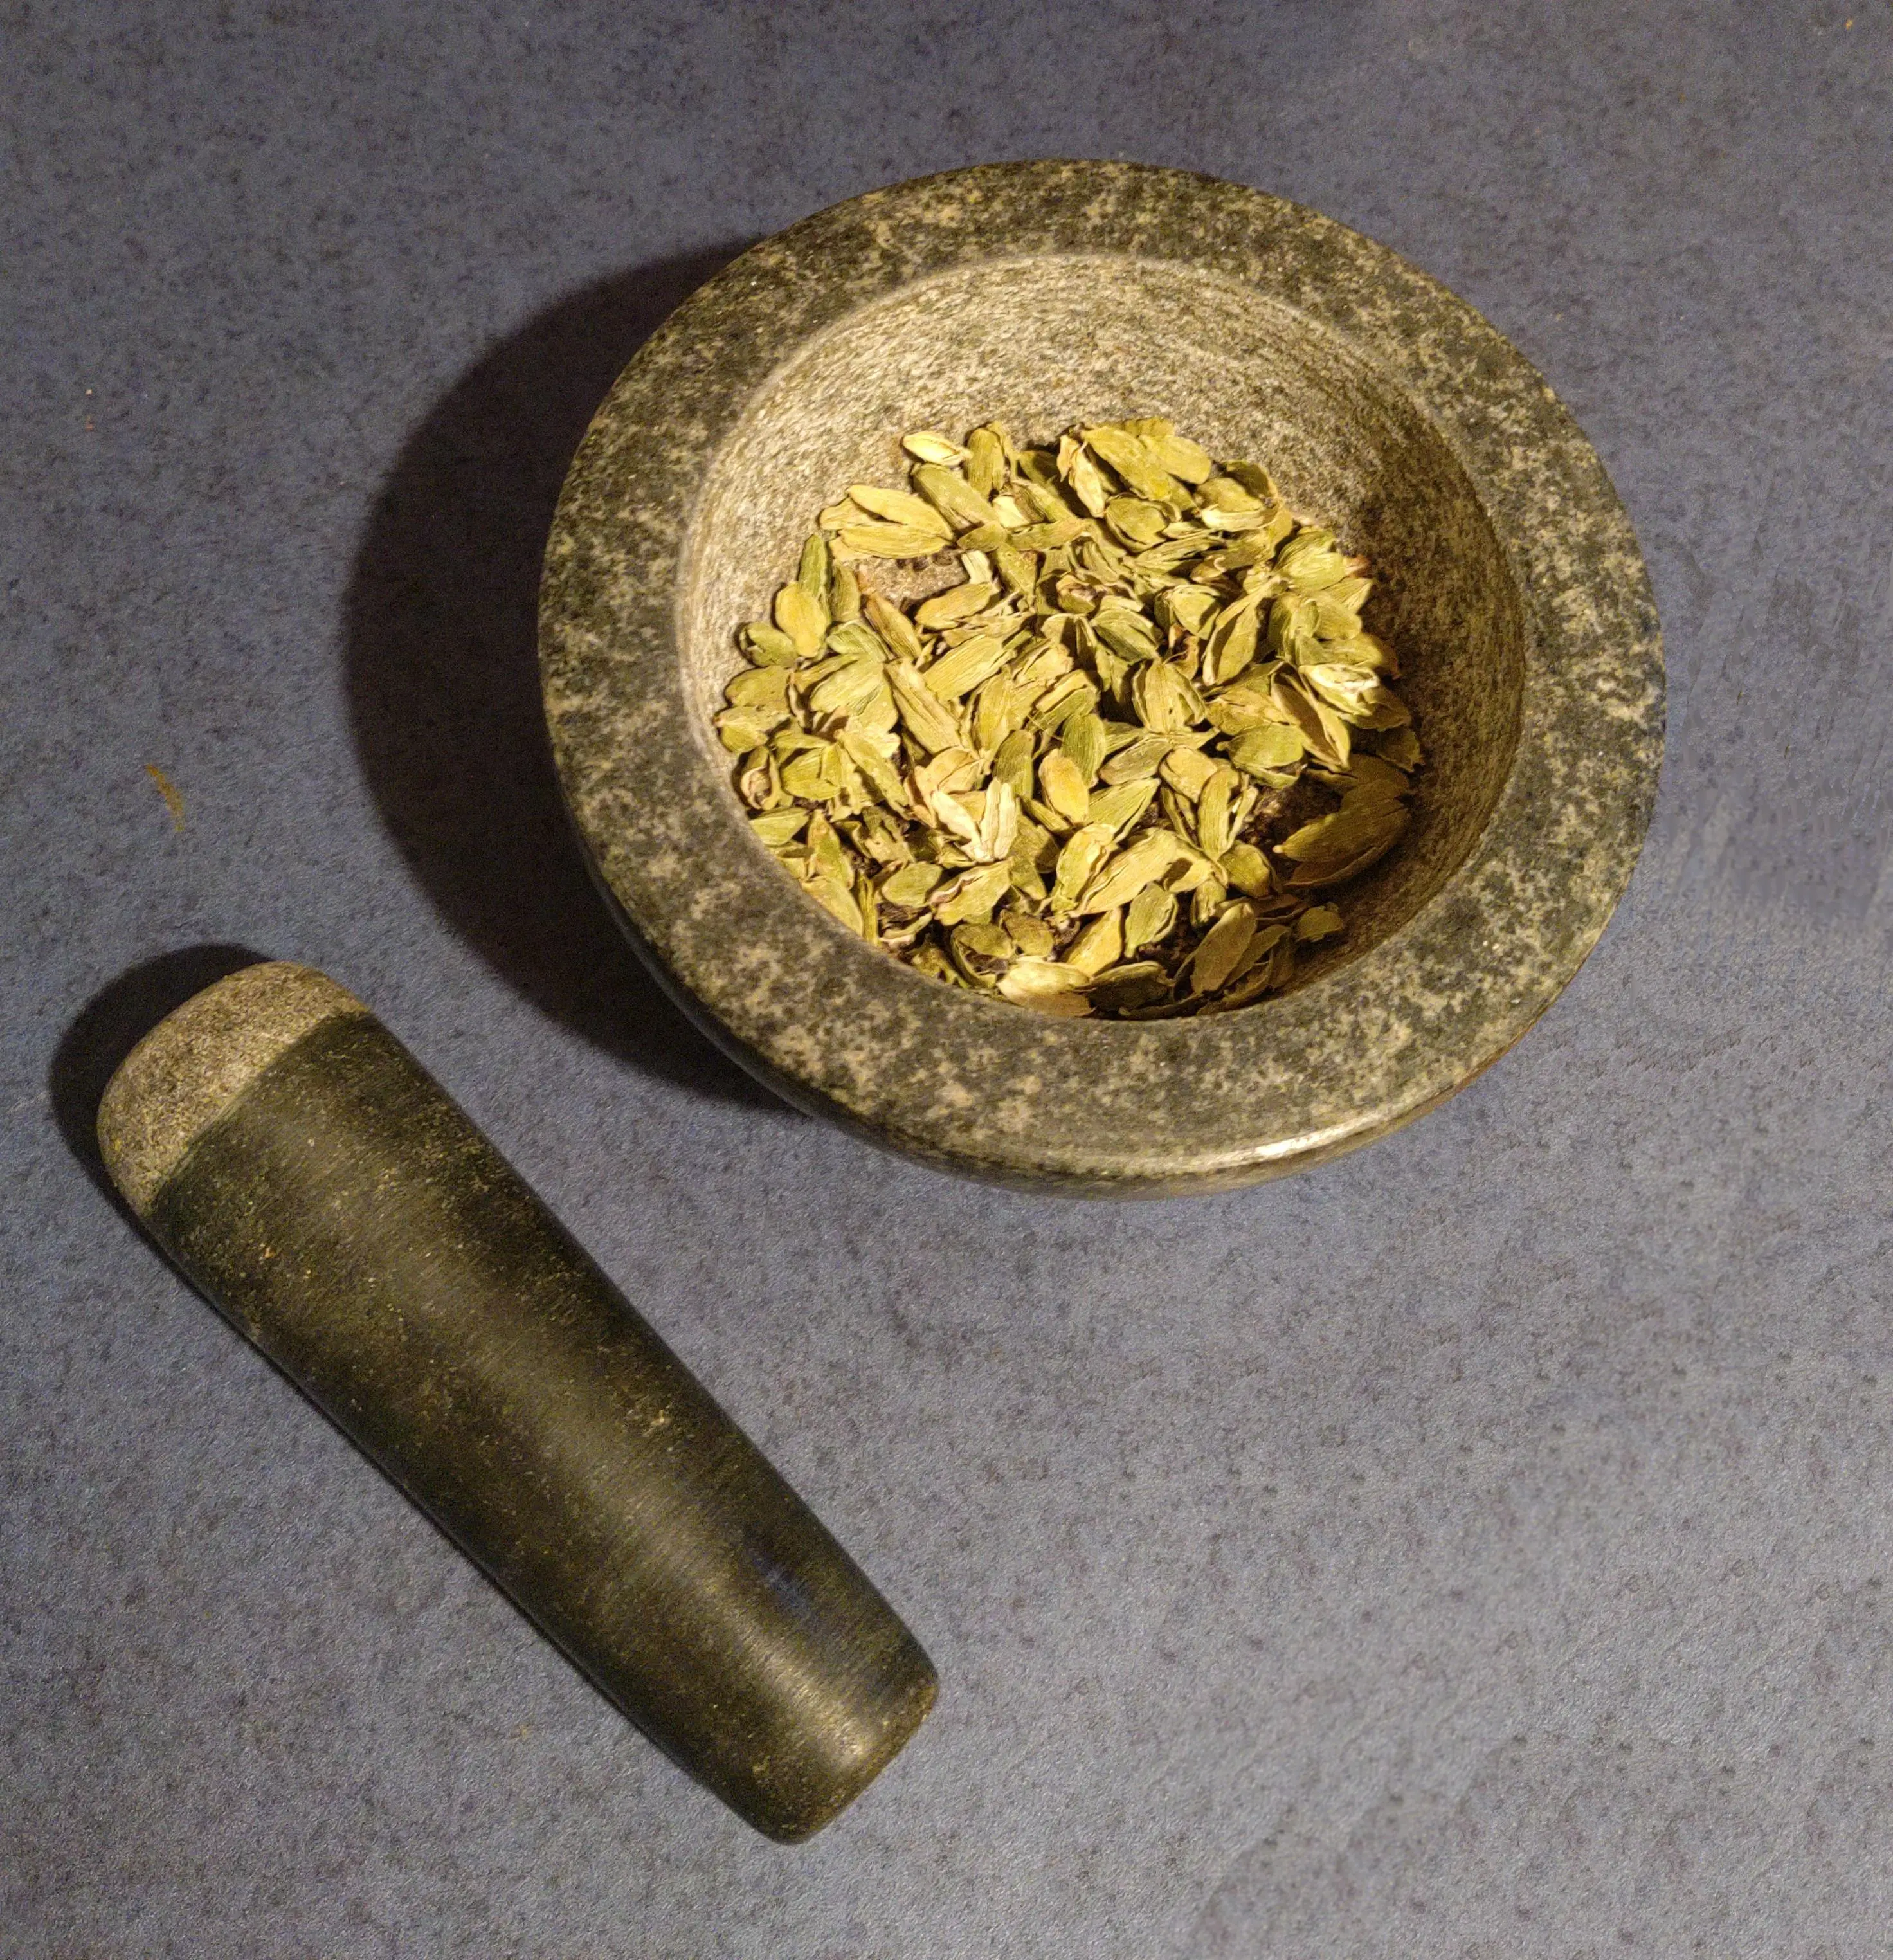 cardamon in a mortal with the pestle next to it